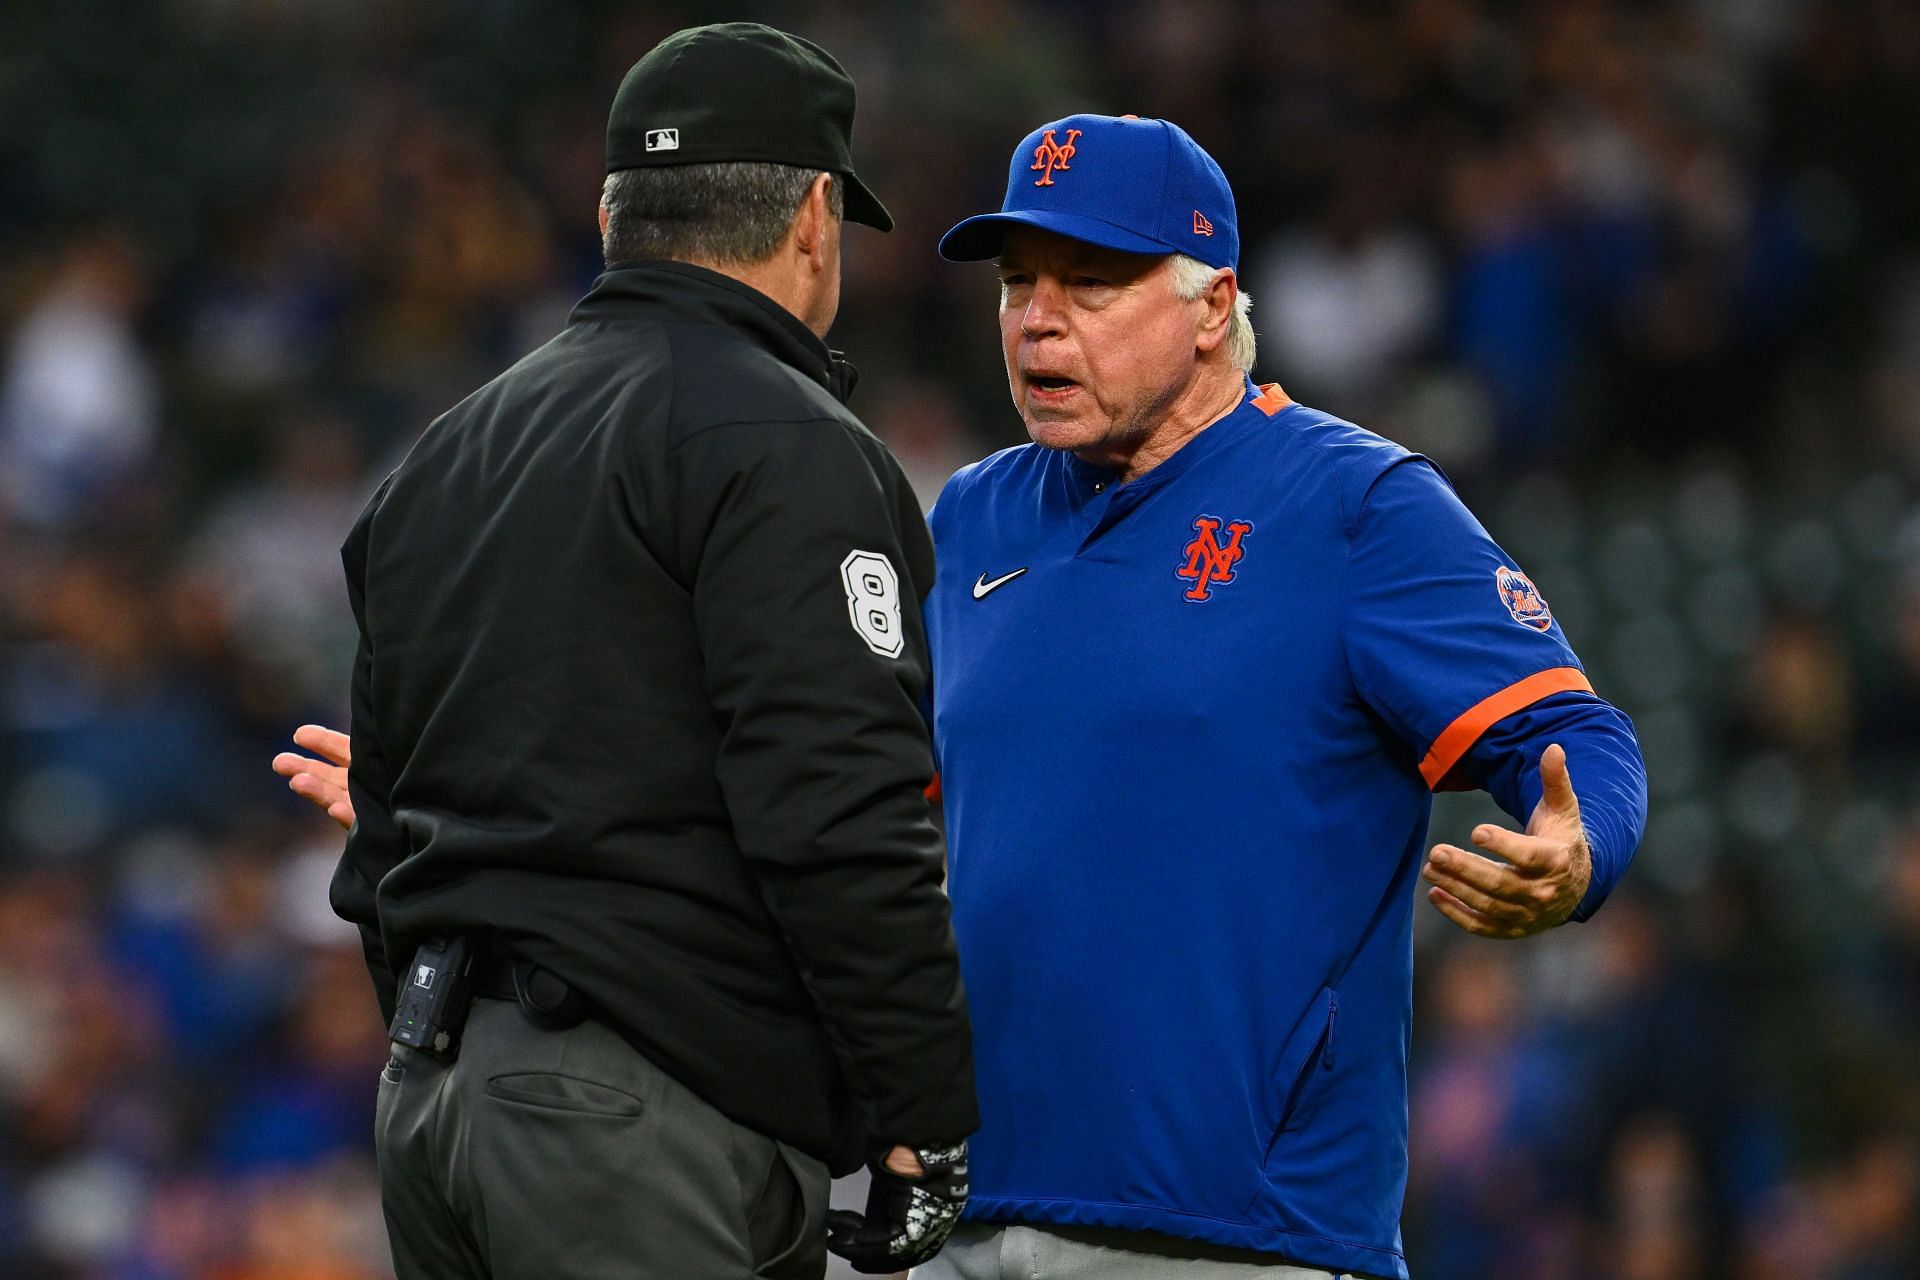 Manager Buck Showalter of the New York Mets talks with umpire Rob Drake against the Chicago Cubs at Wrigley Field